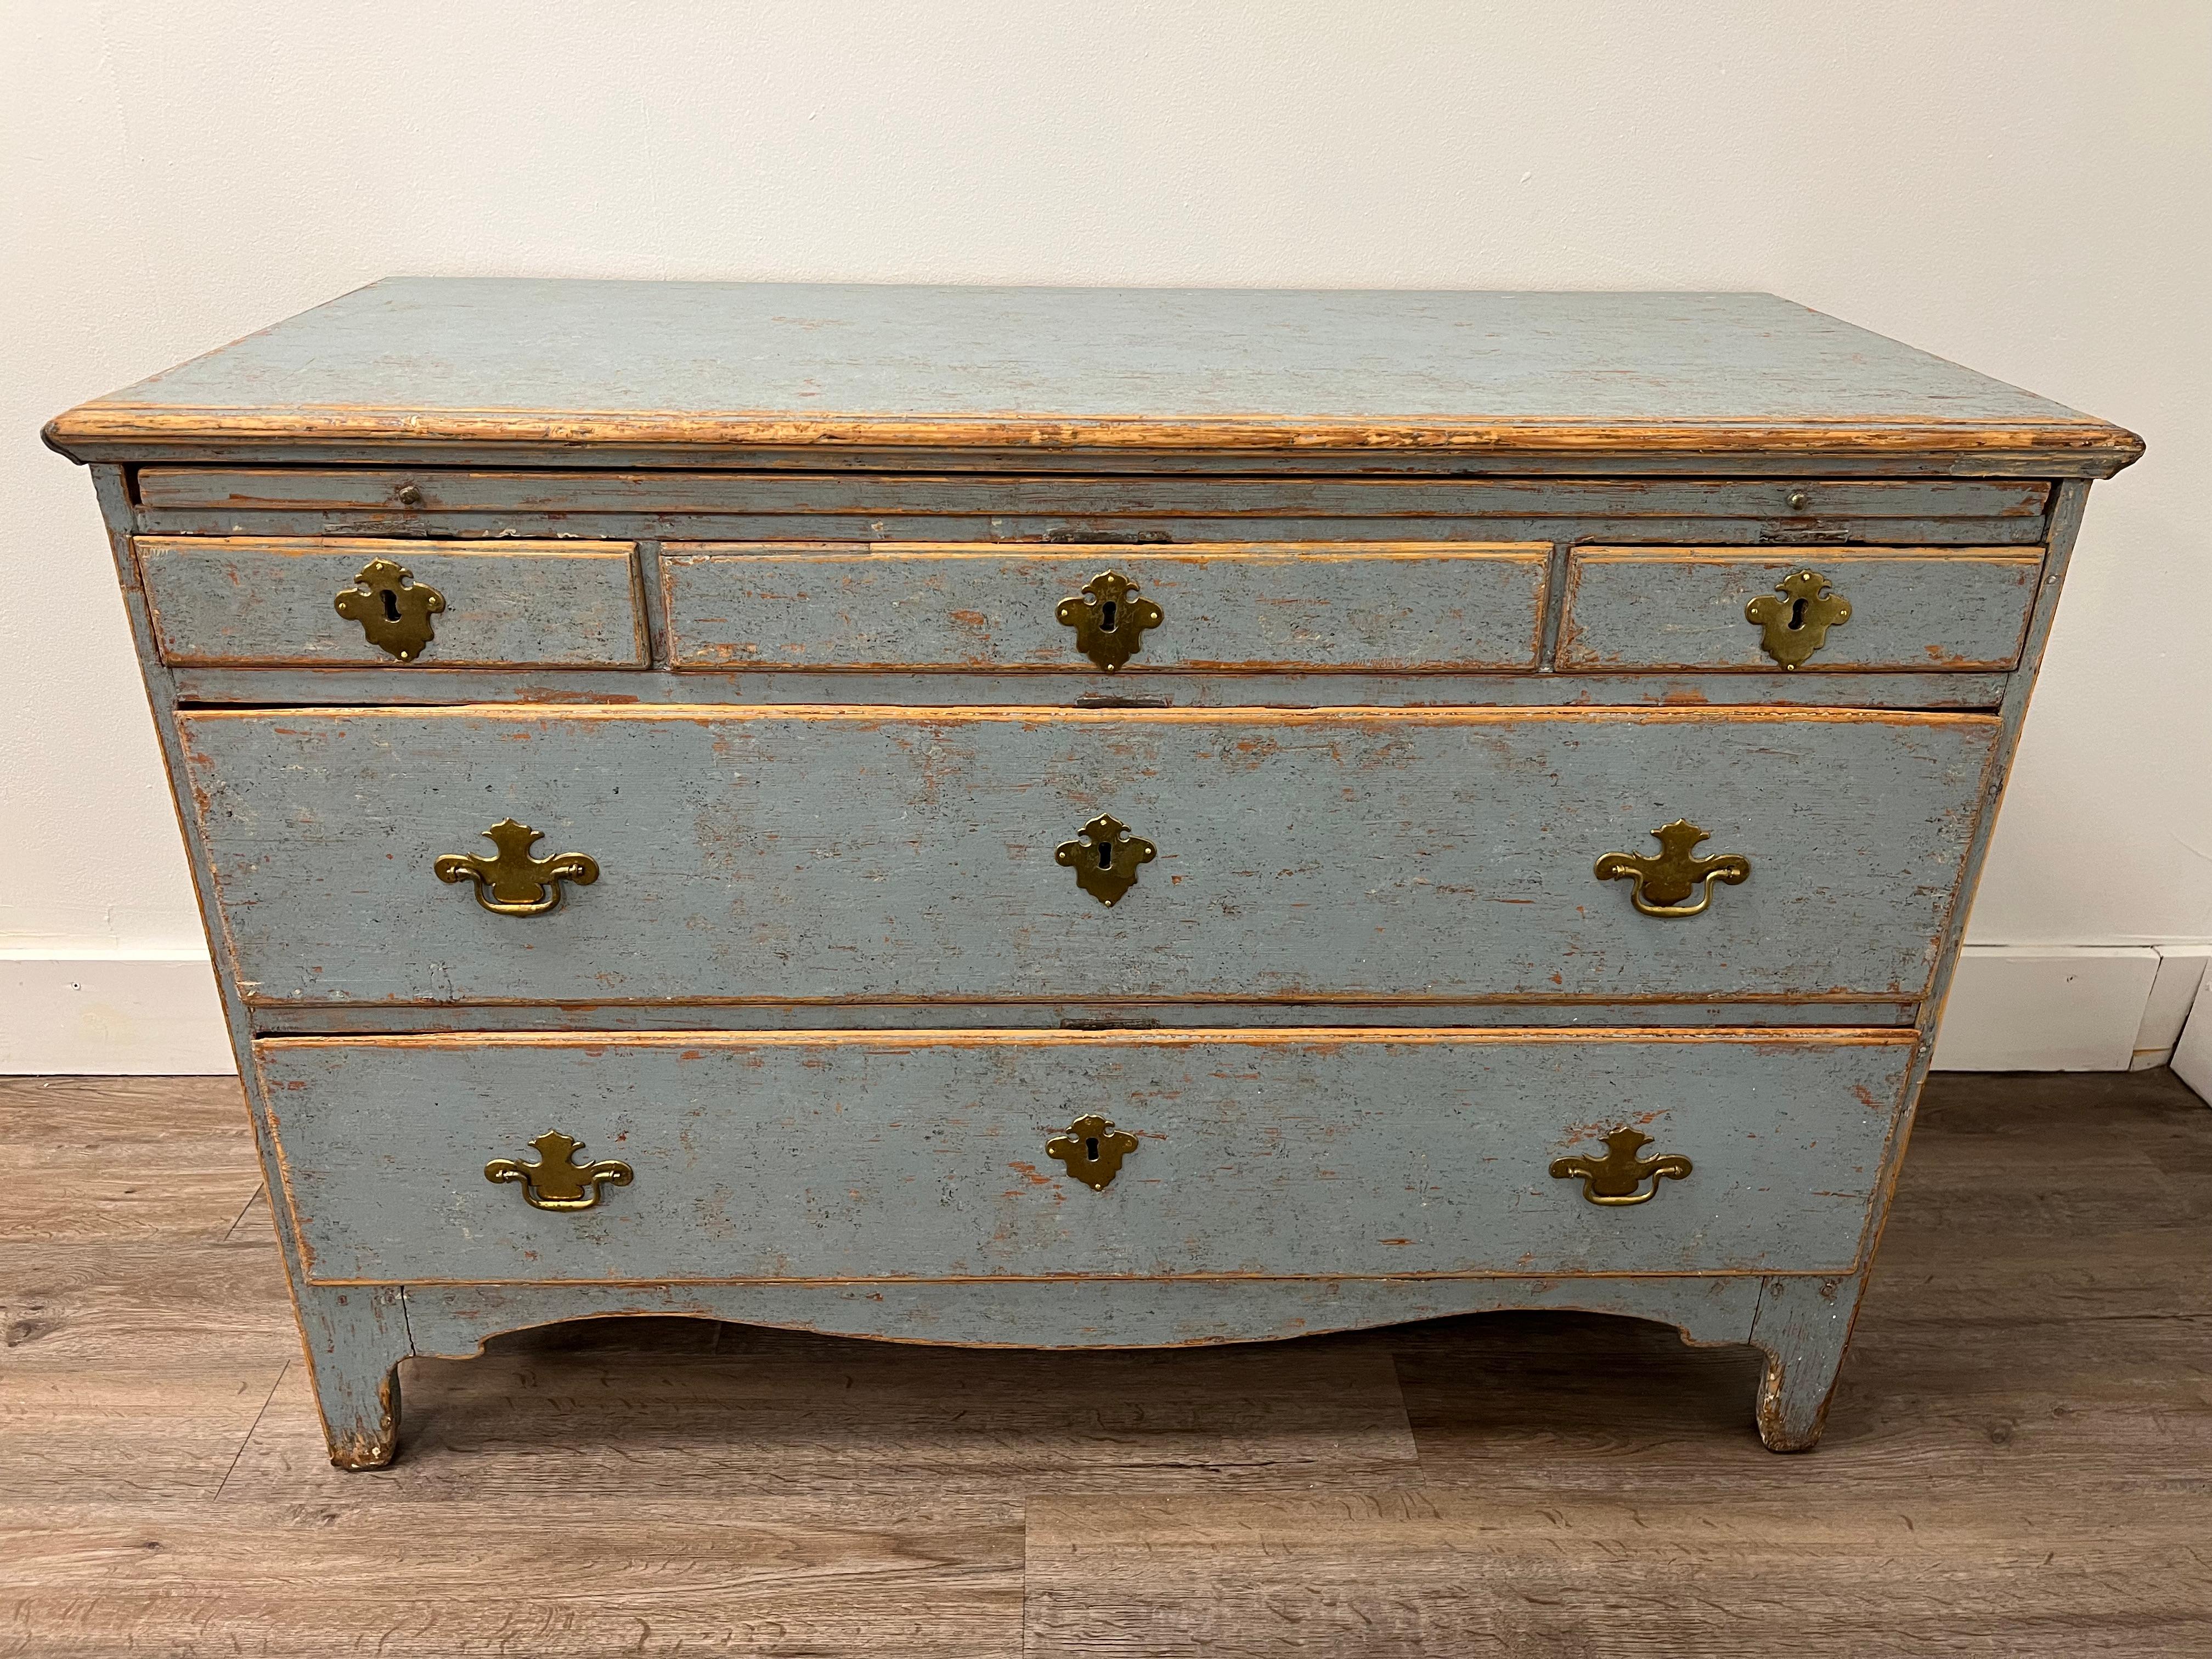 An unusual Rococo commode with original brass hardware. One original lock and four early 20th century replacements. Slide-out shelf over five drawers. Original iron handles on each side. Tastefully repainted in pale blue. 